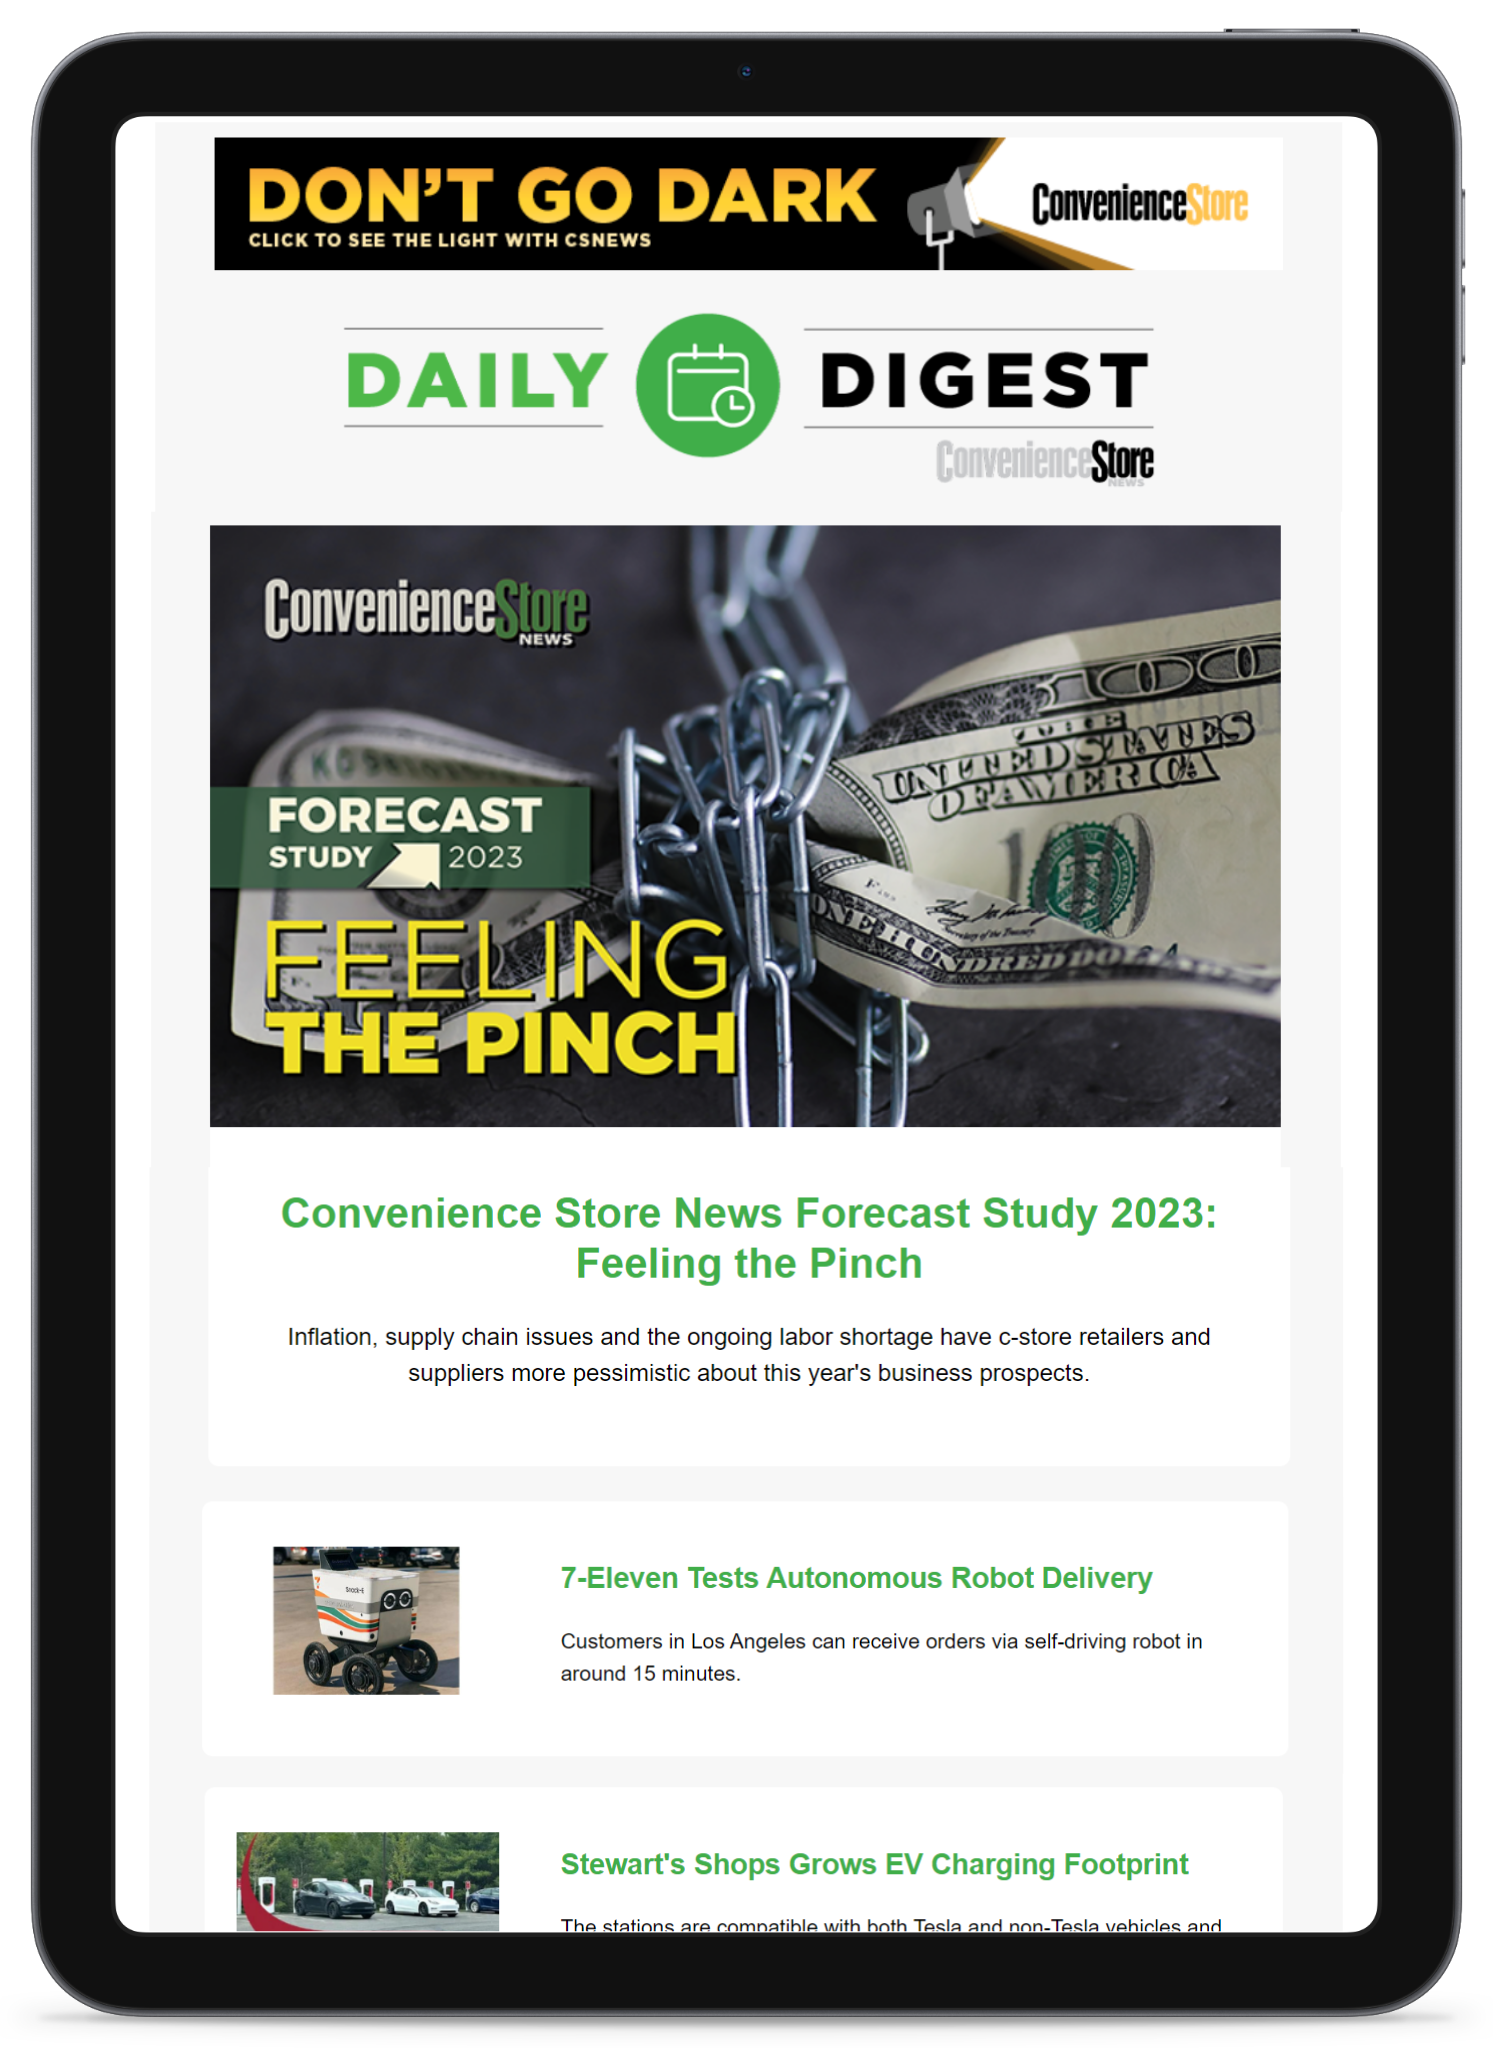 iPad Convenience Store News Trend Watch Content